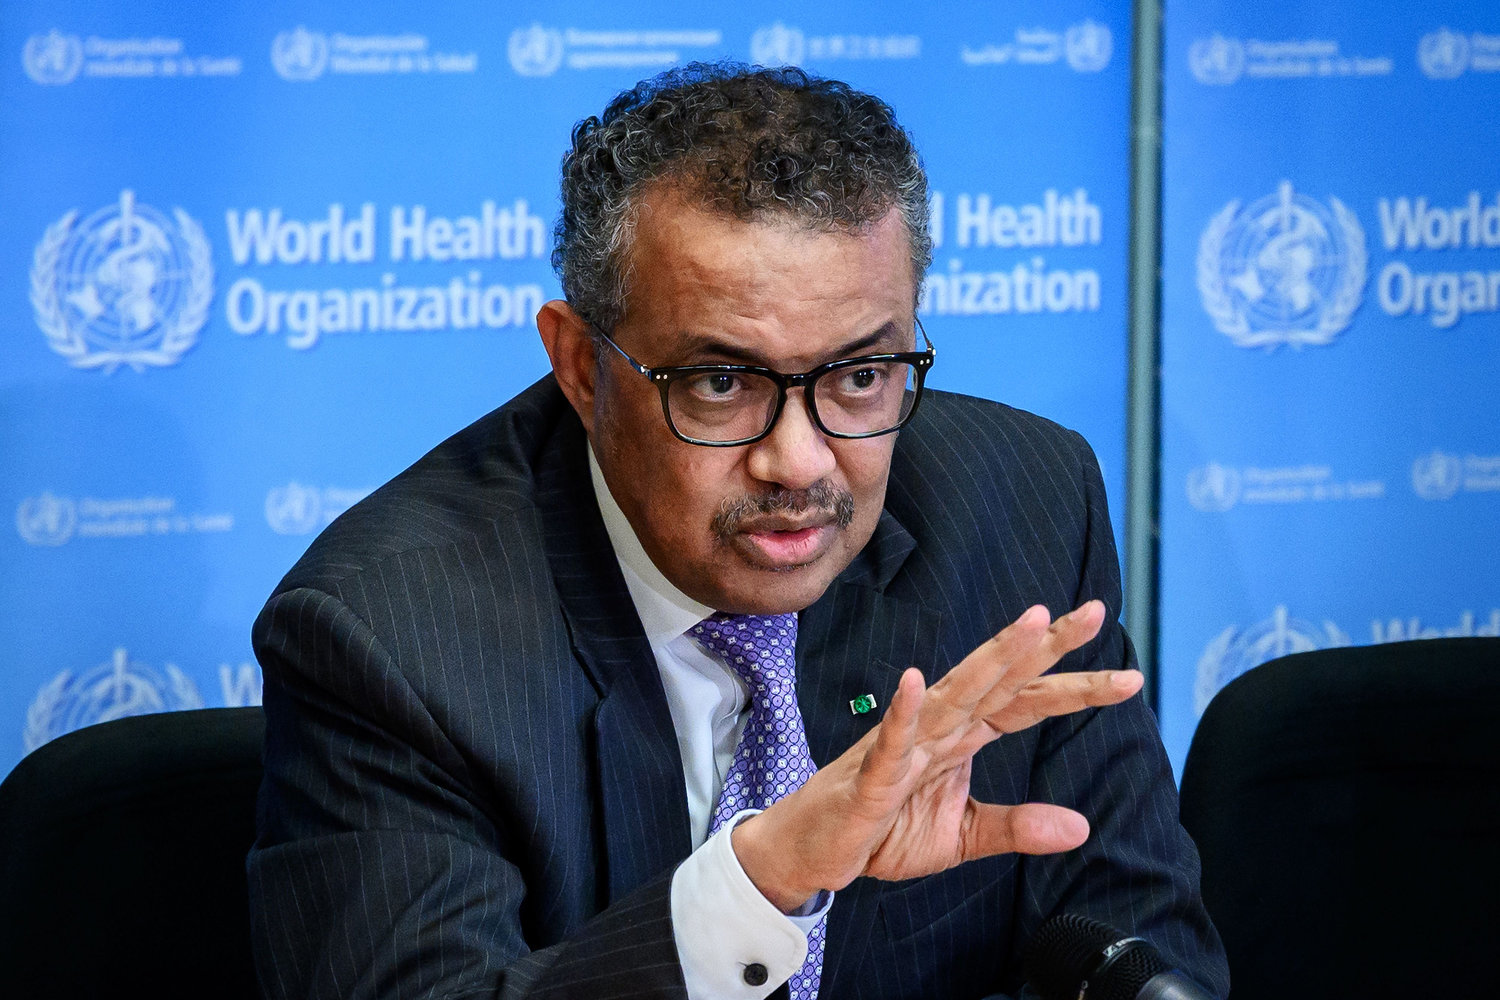 World Health Organization (WHO) Director-General Tedros Adhanom Ghebreyesus gestures as he speaks during a news briefing on the COVID-19 virus at the WHO headquarters in Geneva on March 9, 2020. (Fabrice Coffrini/AFP/Getty Images/TNS)